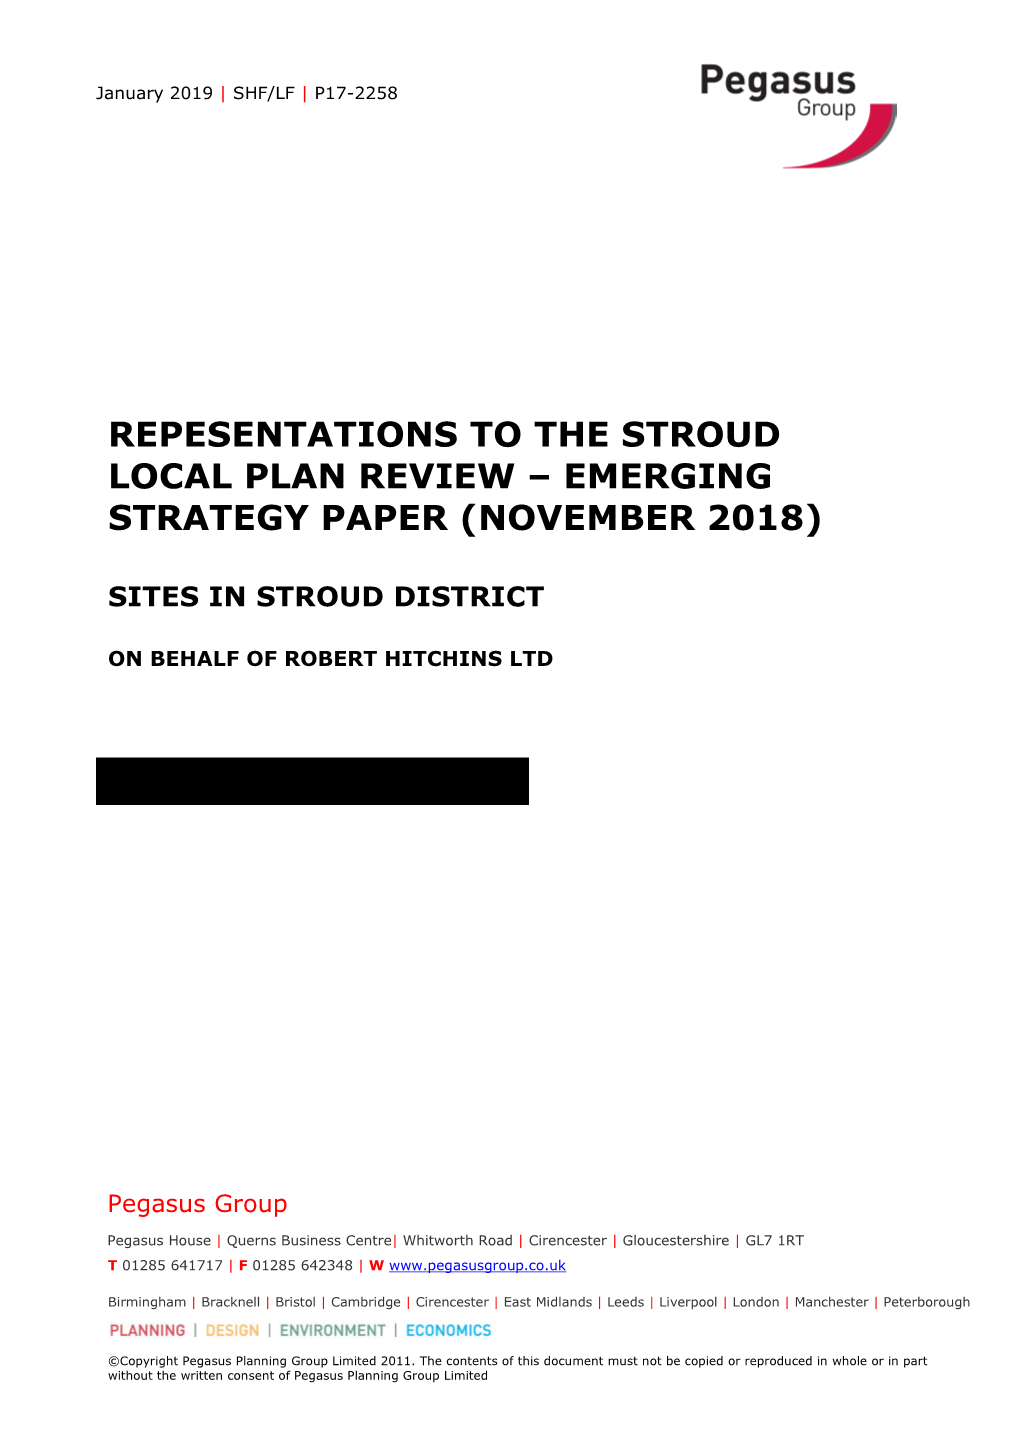 Repesentations to the Stroud Local Plan Review – Emerging Strategy Paper (November 2018)